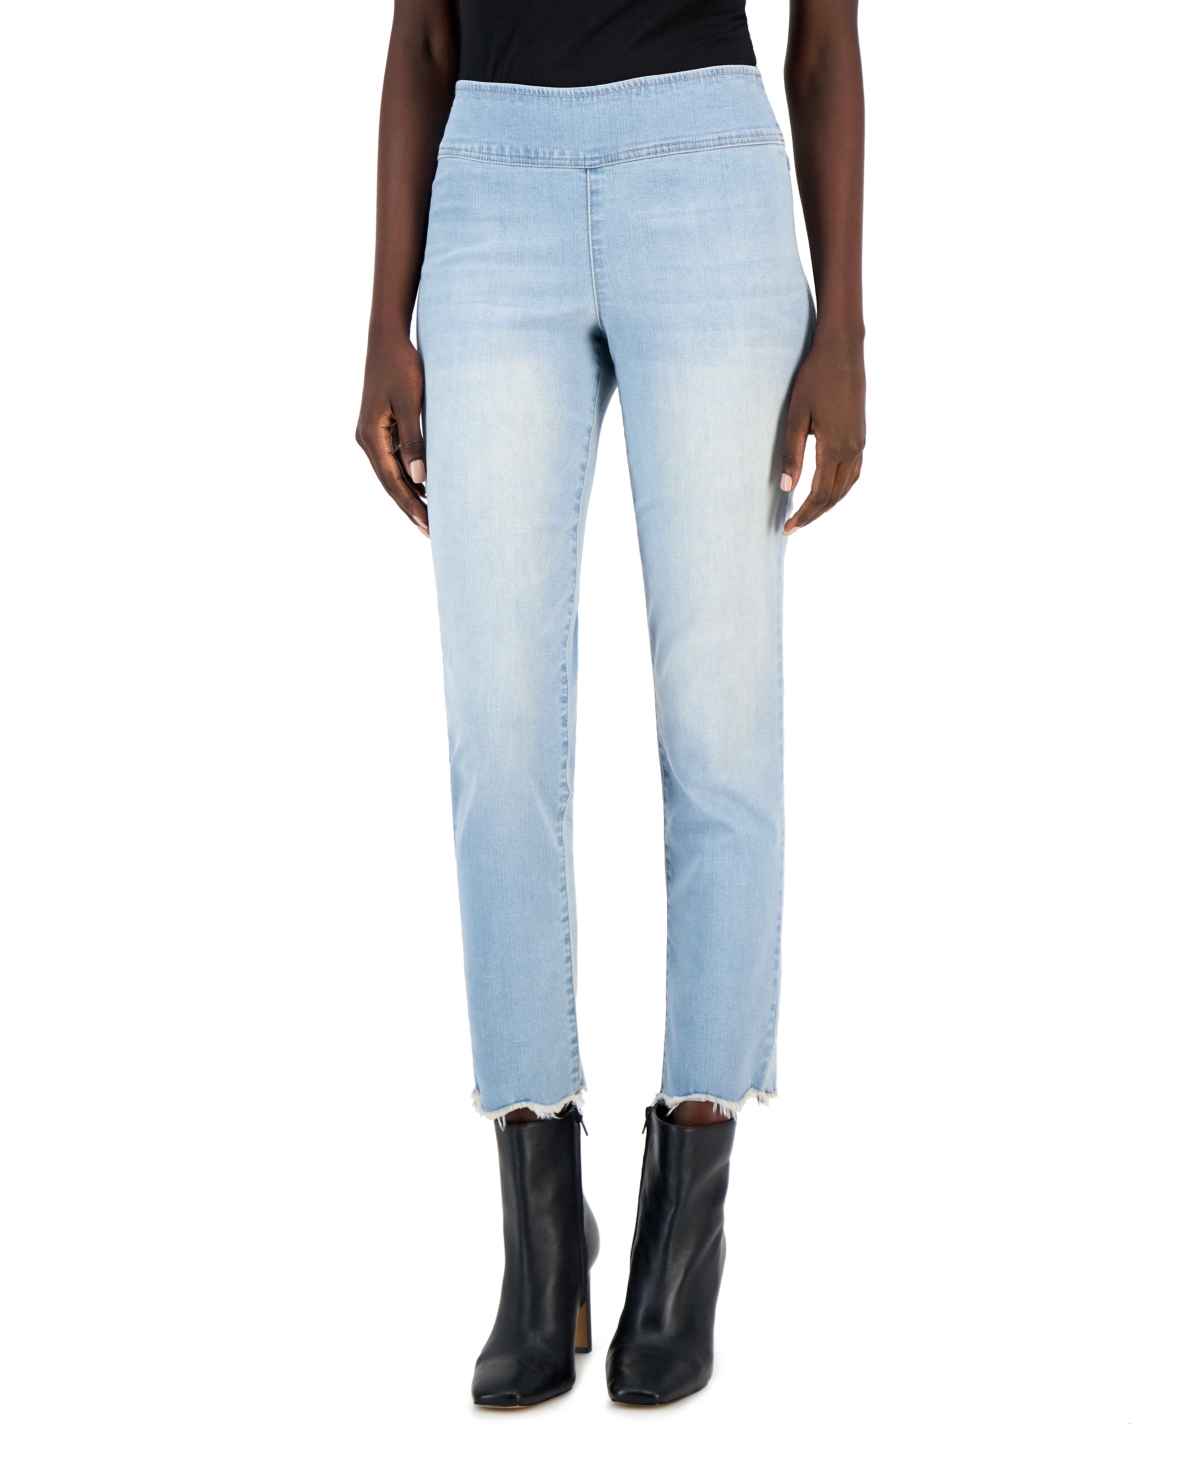  Inc International Concepts Women's Pull-On Straight-Leg Jeans, Created for Macy's